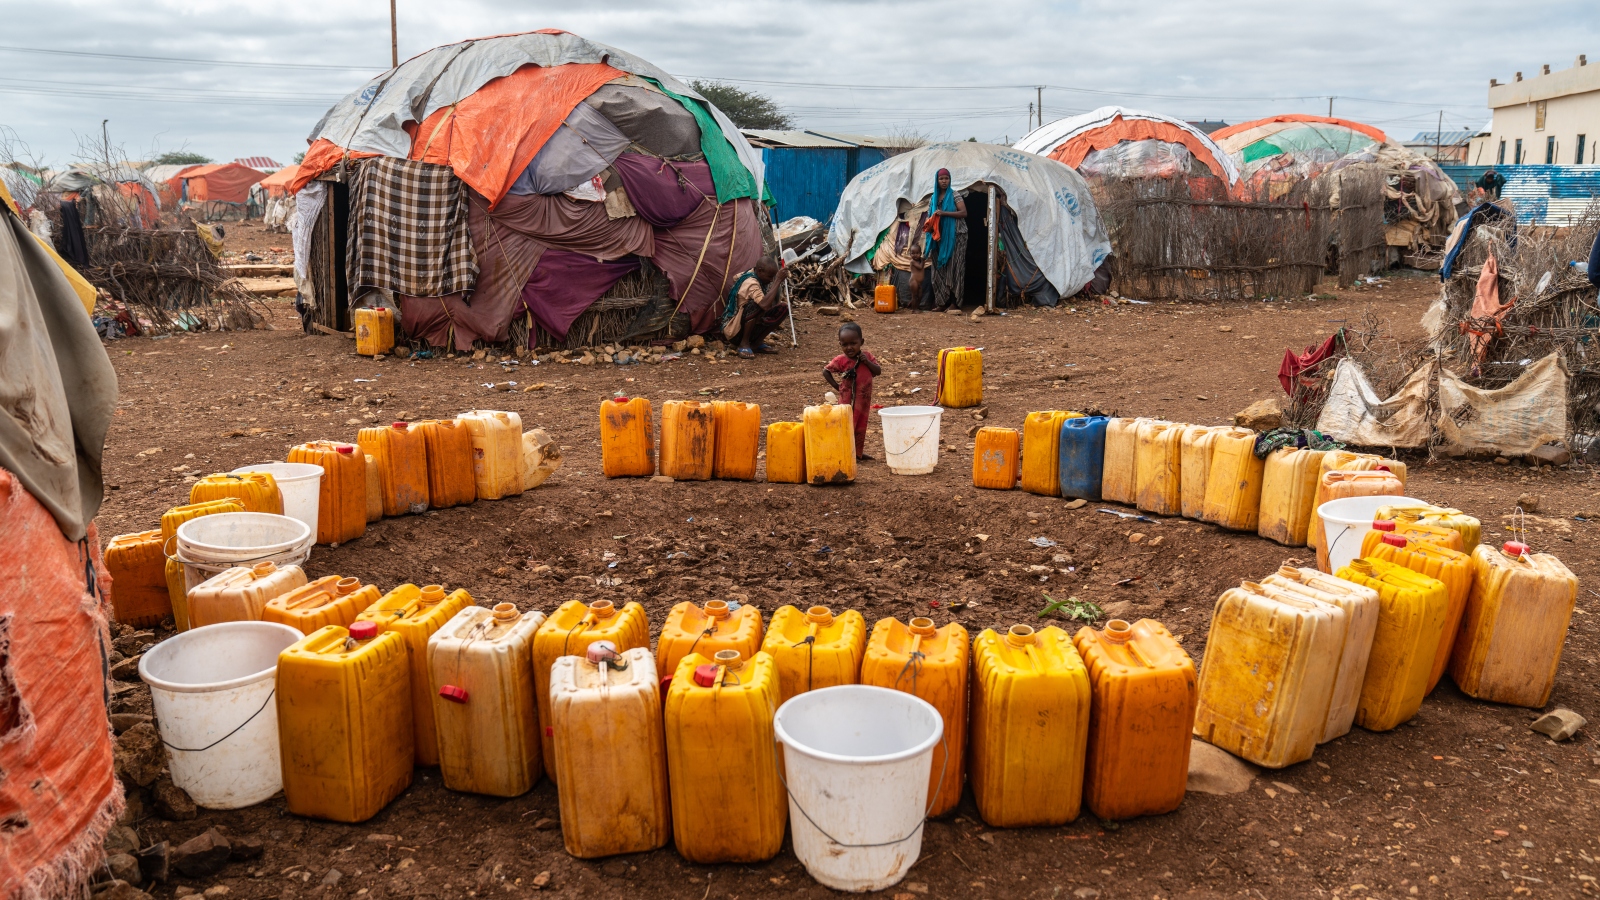 The general view of the Baidoa displaced persons settlement in Baidoa, Somalia. Hundreds of thousands of Somalis arrived at the camp last year during a severe drought.